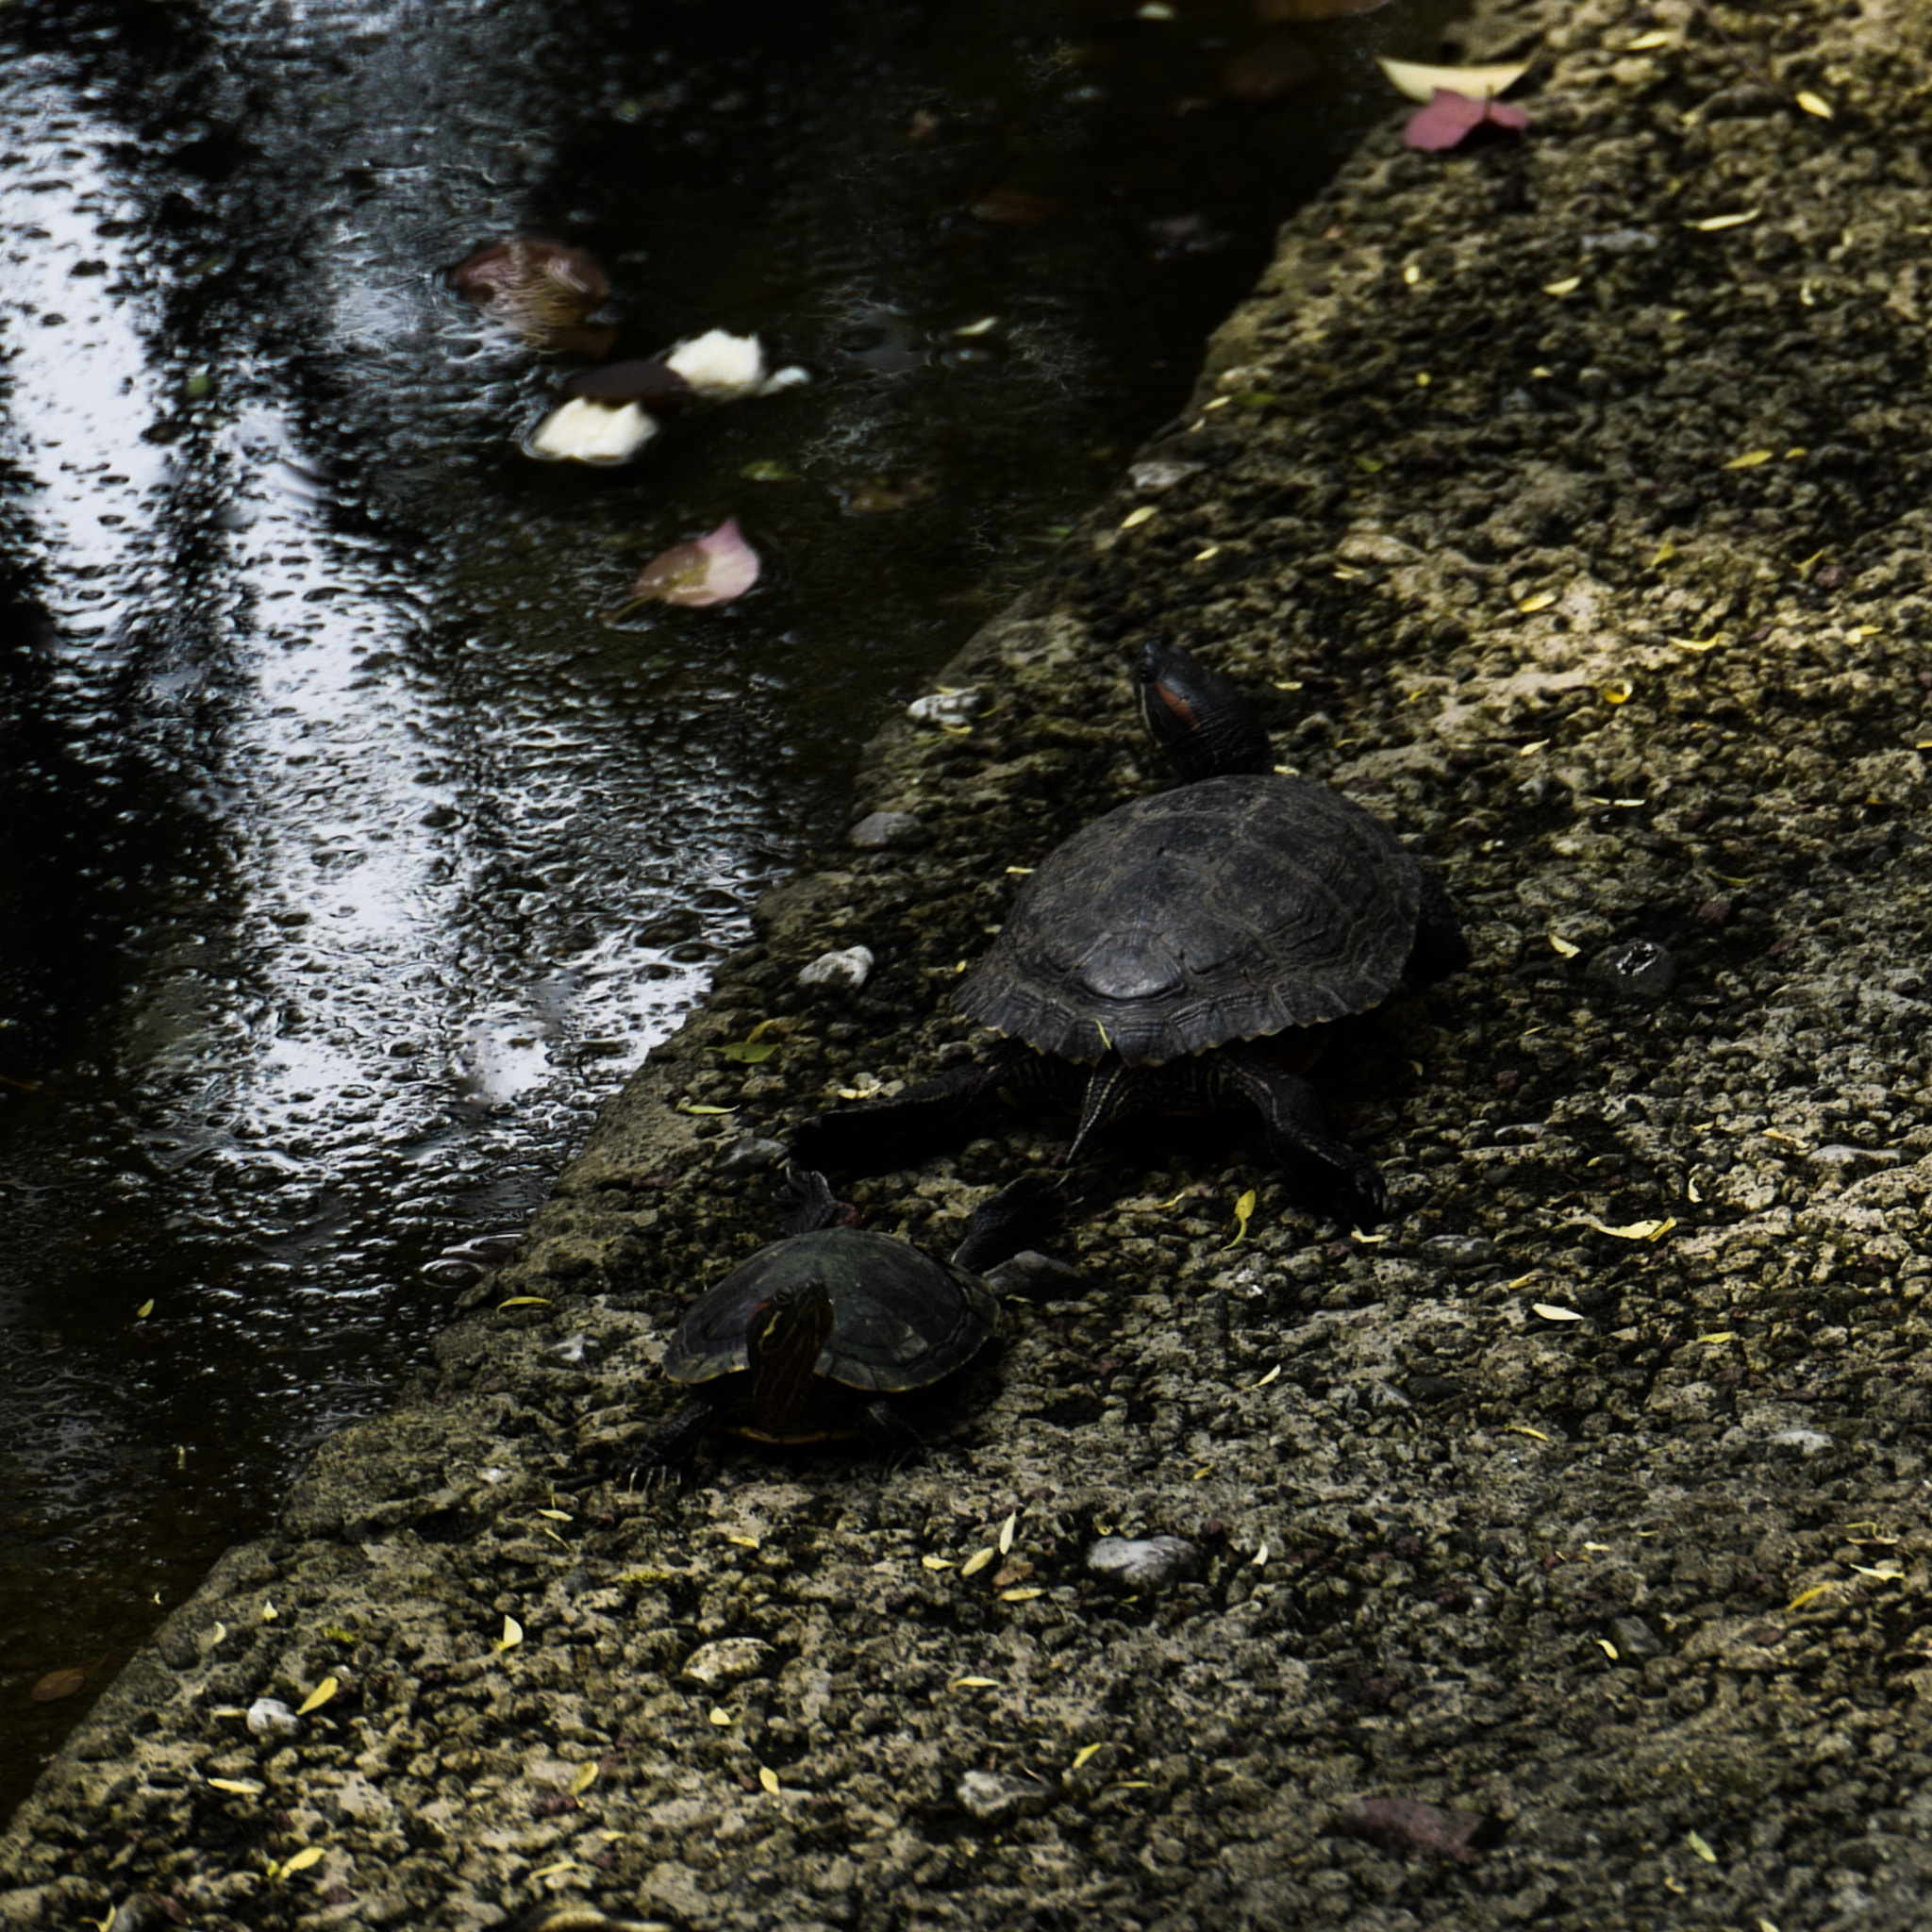 VARIO-ELMARIT 1:2.8-4.0/24-90mm ASPH. OIS sample photo. The basking turtles in temple 02 photography